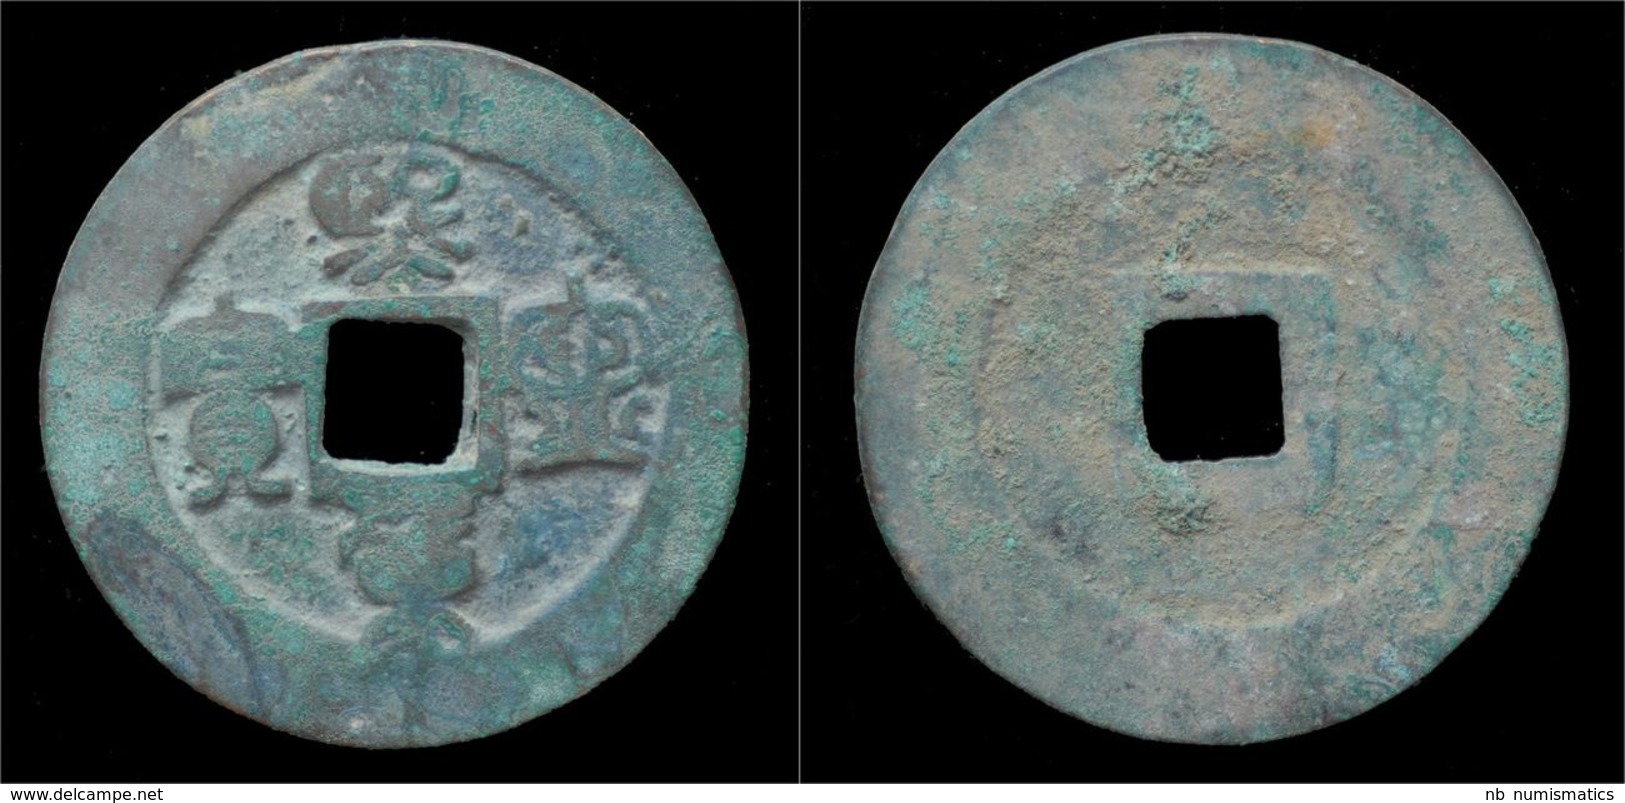 China Northern Song Dynasty Emperor Shen Zong AE 3-cash - Chinoises